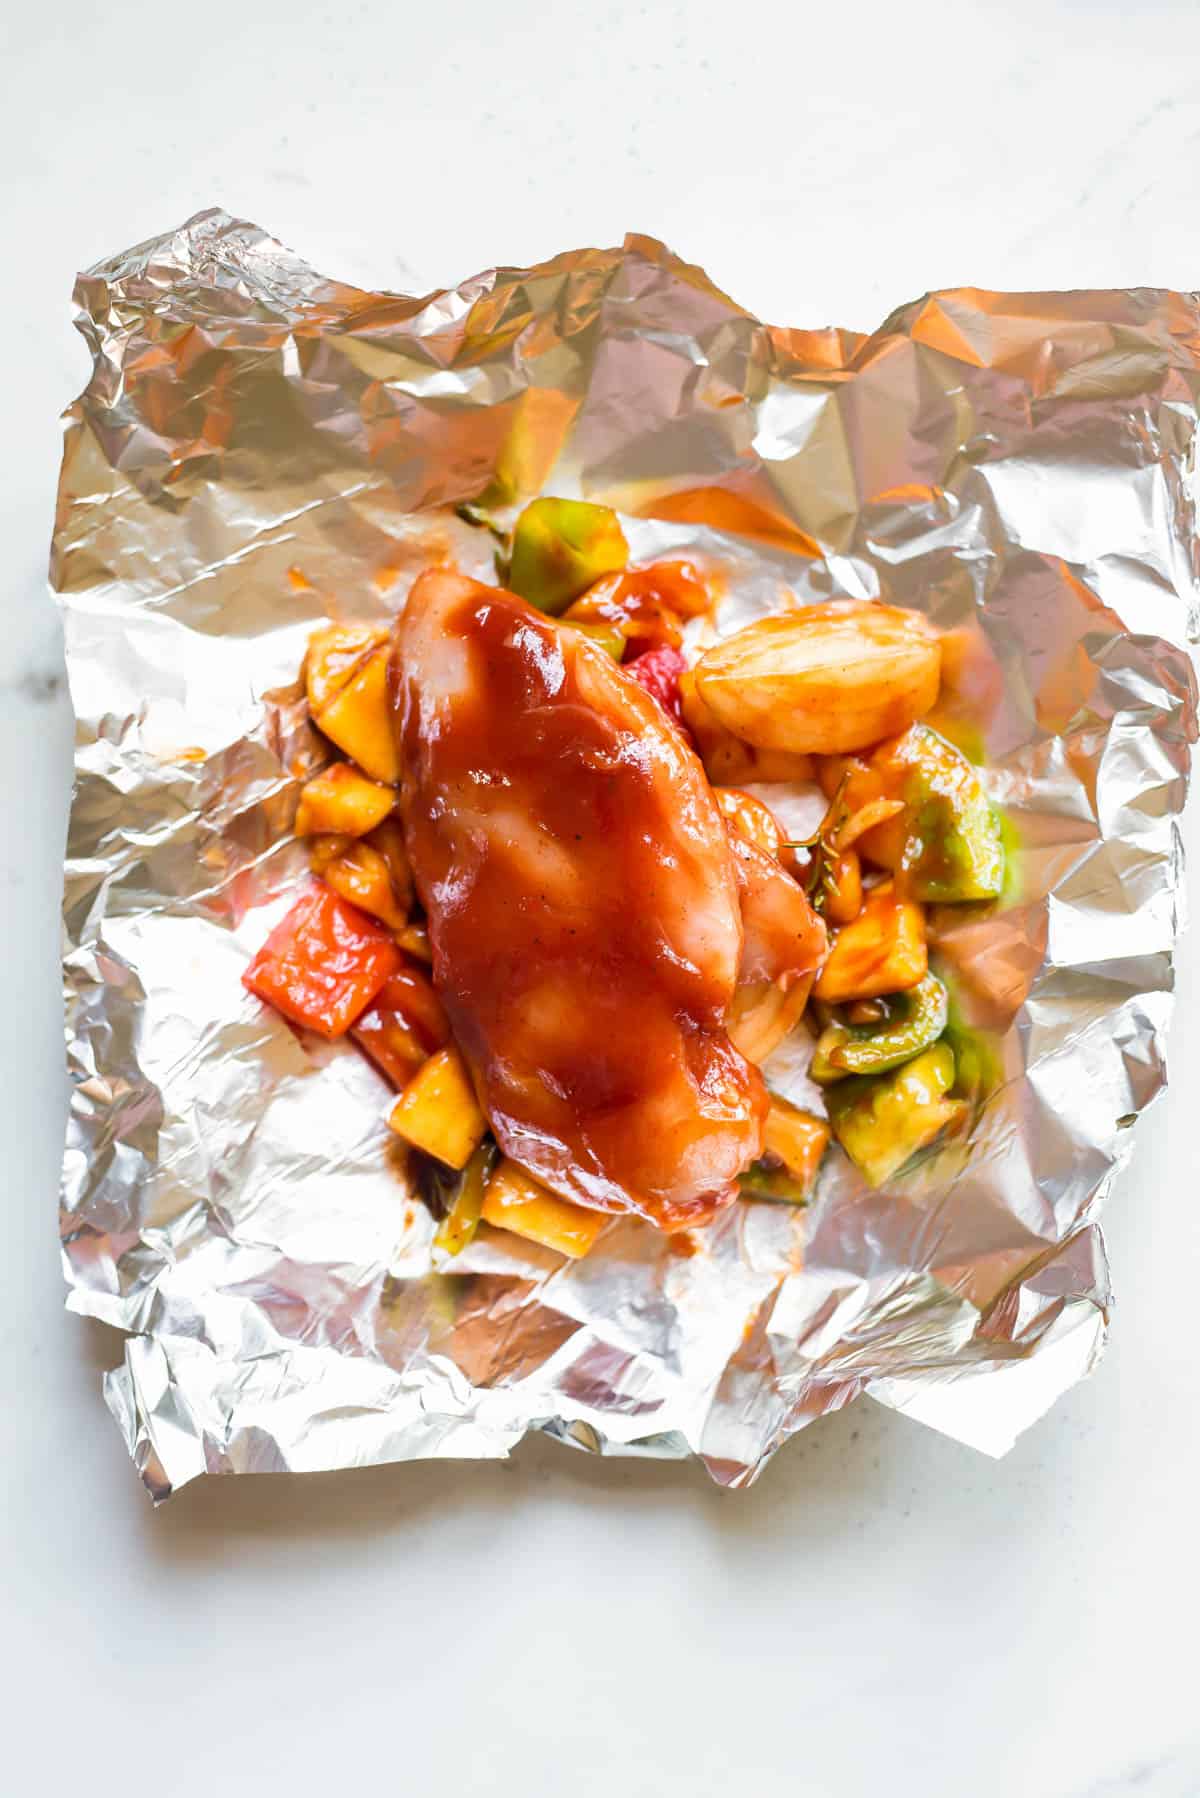 A chicken breast covered in bbq sauce resting on top of chopped pineapple and vegetables ready to be wrapped in aluminum foil.